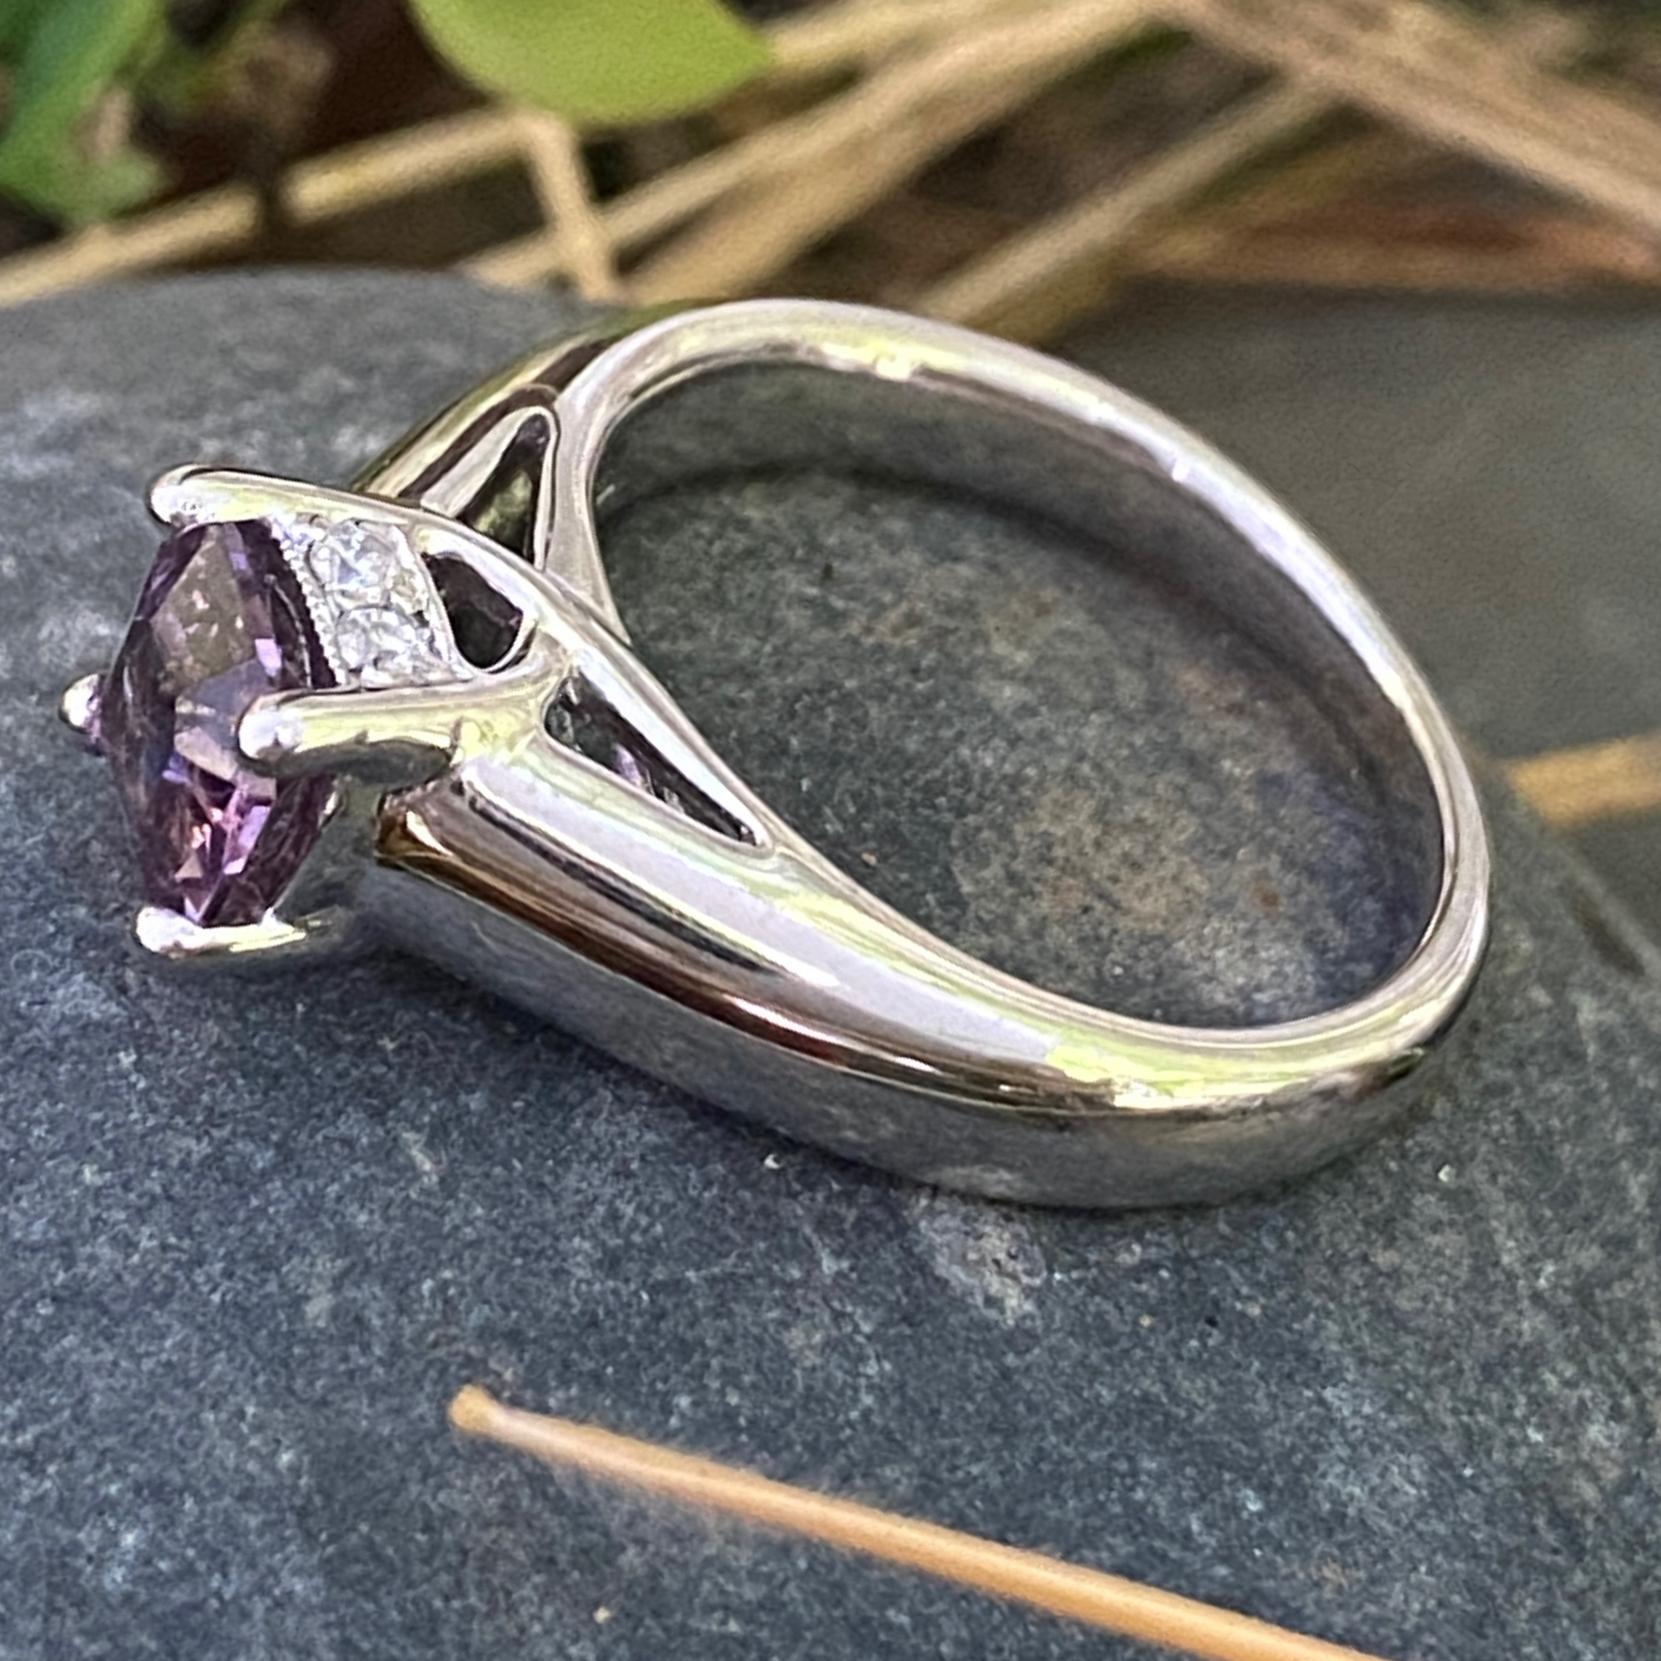 Square Cut Mauve Spinel Set in Circa 2000 White Gold Solitaire with Diamond Accents